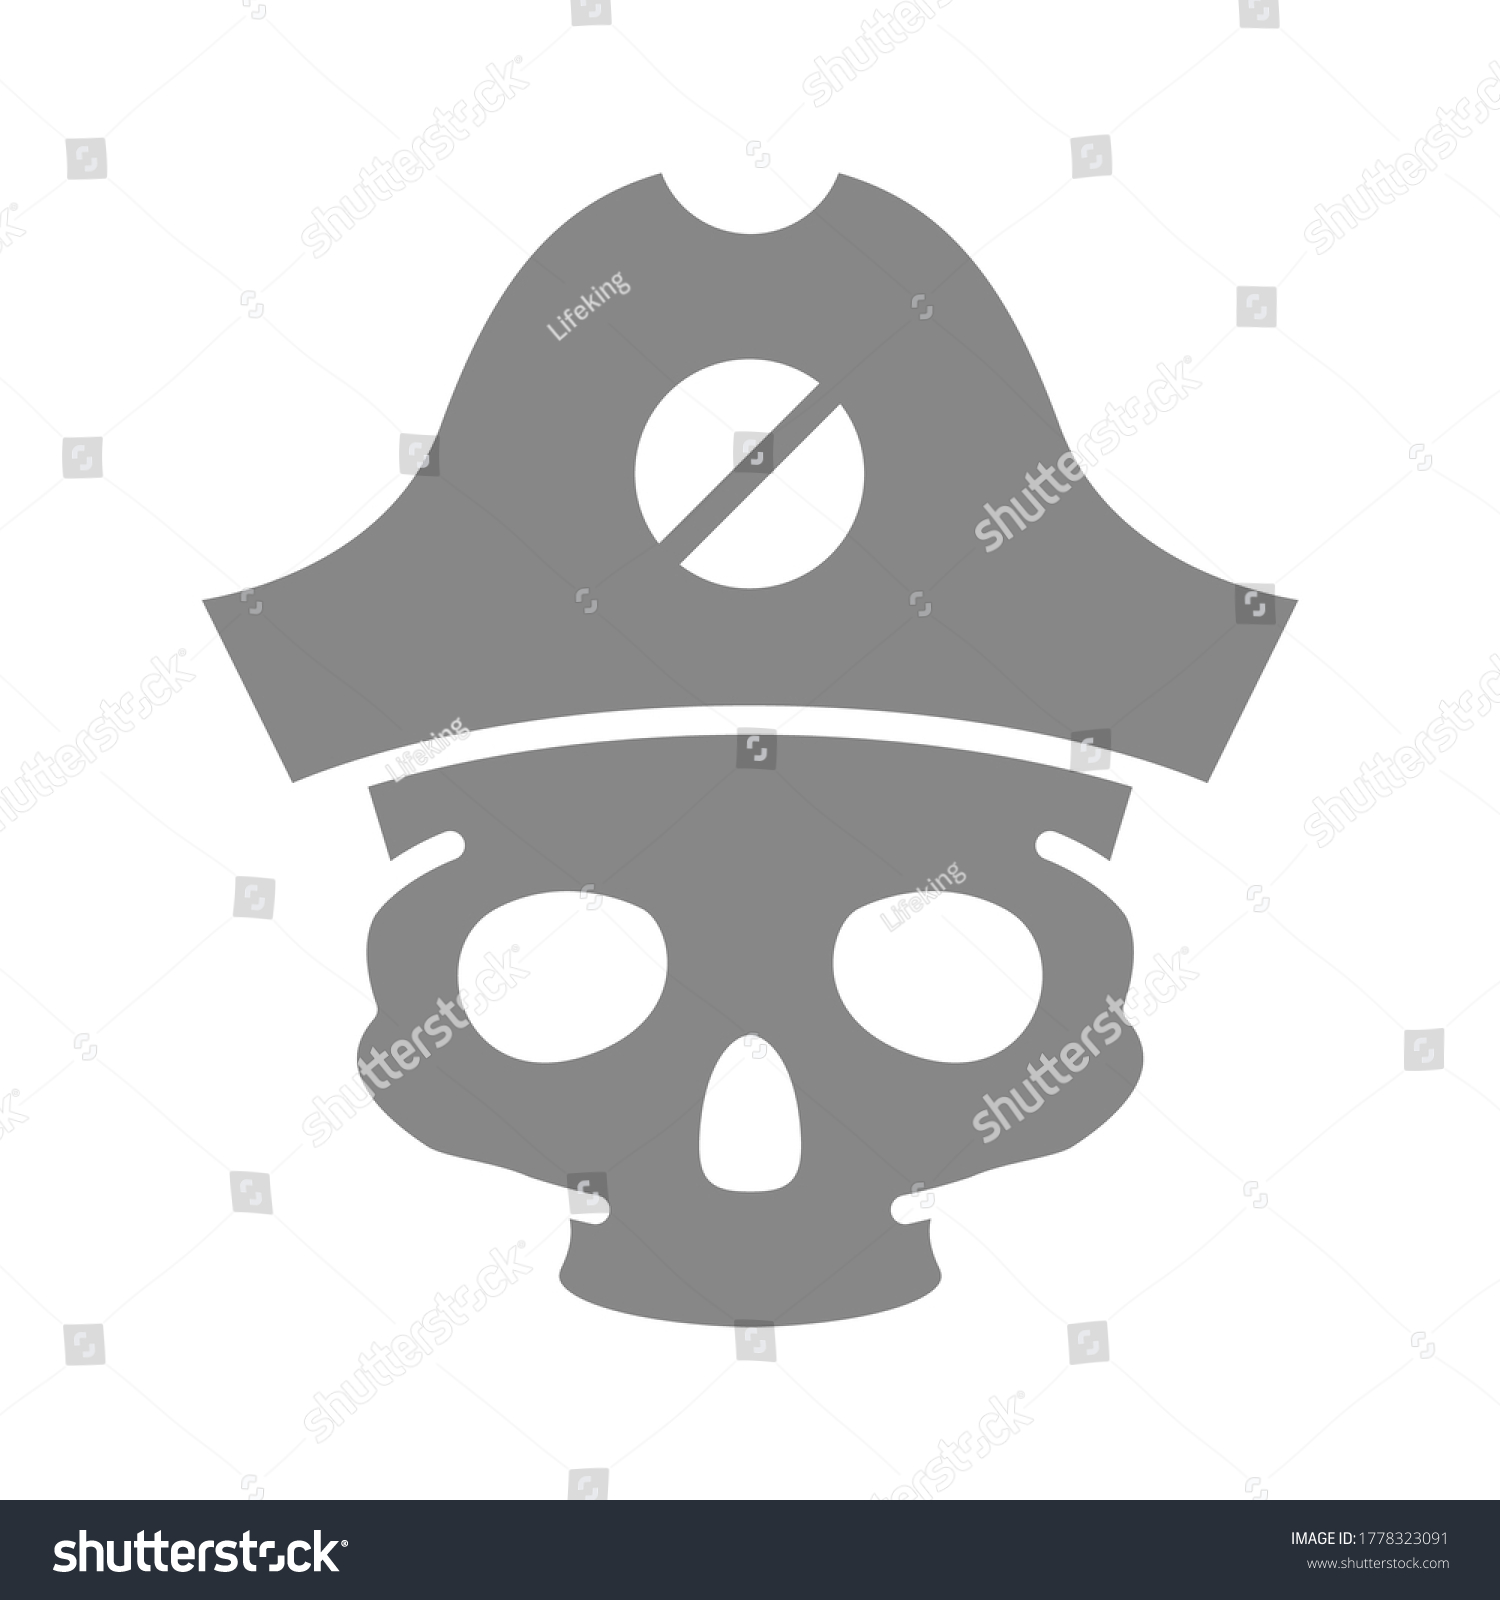 Skull Pirate Captain Hat Grey Icon Stock Vector Royalty Free 1778323091 Shutterstock 3294